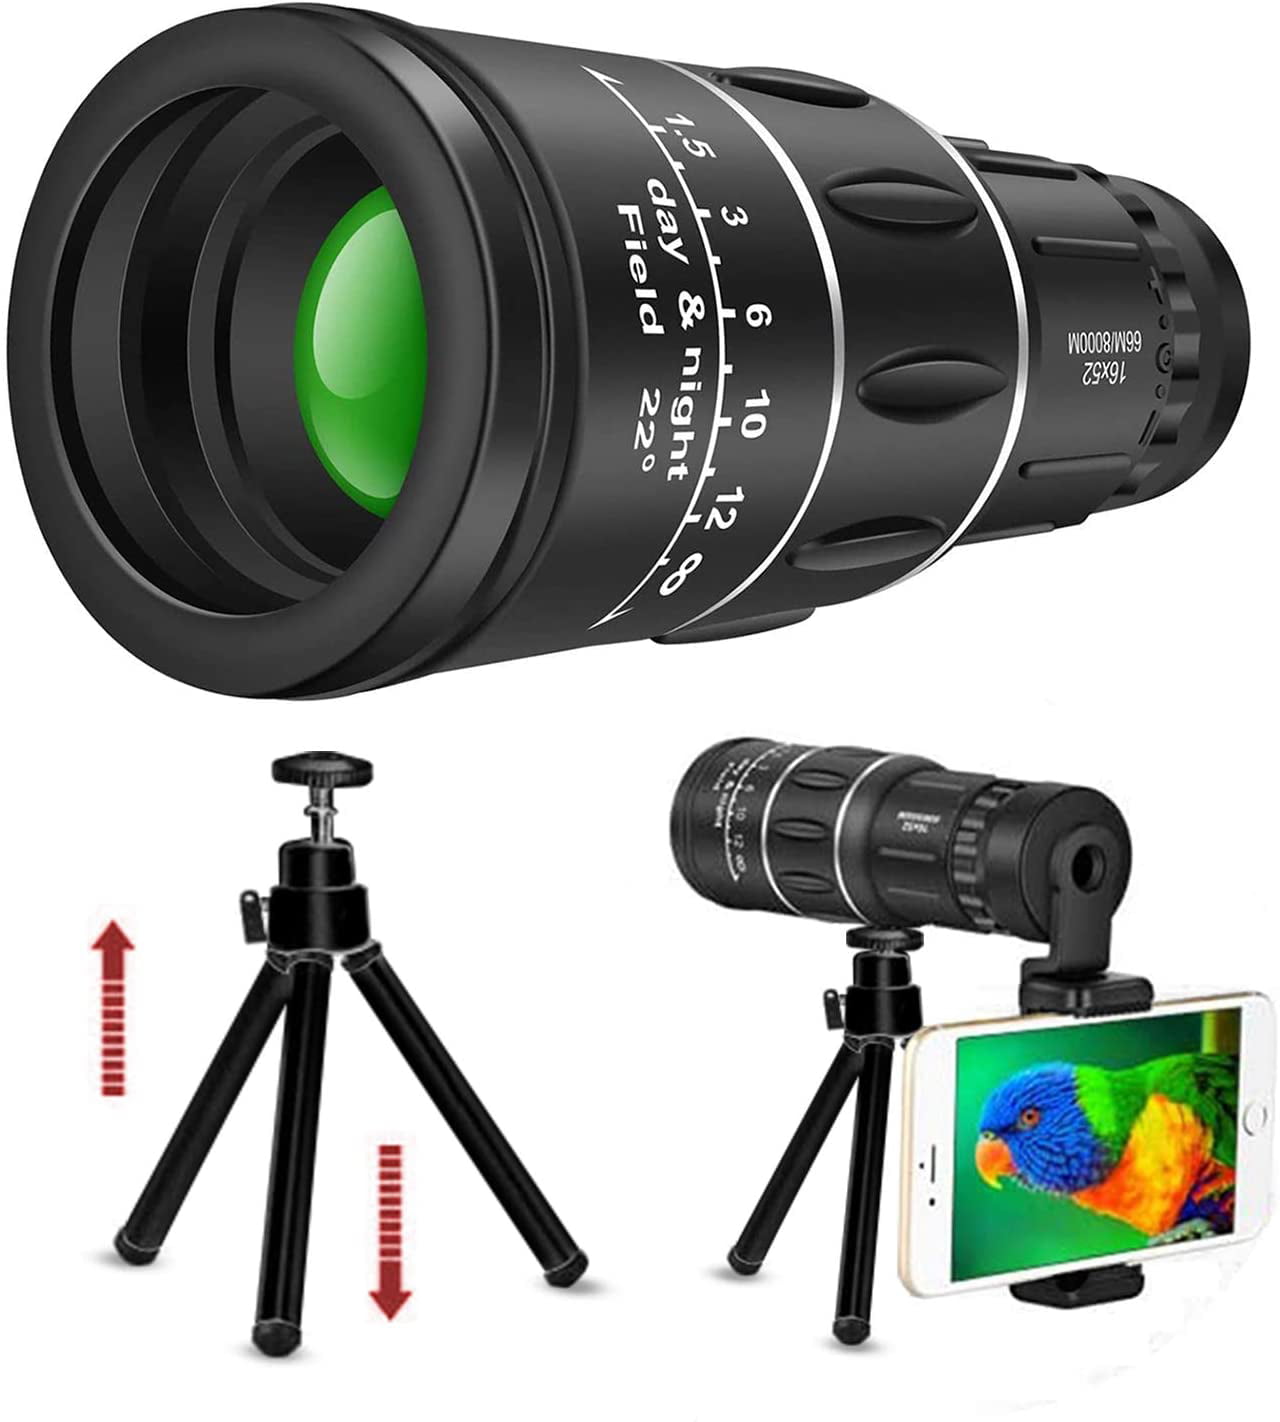 Super Clear Waterproof Monocular HD FMC BAK4 Monocular with Low Light Night Vision for Outdoor Activities Wildlife Watching Travelling etc 16x40 Compact Monocular Telescope for Bird Watching 